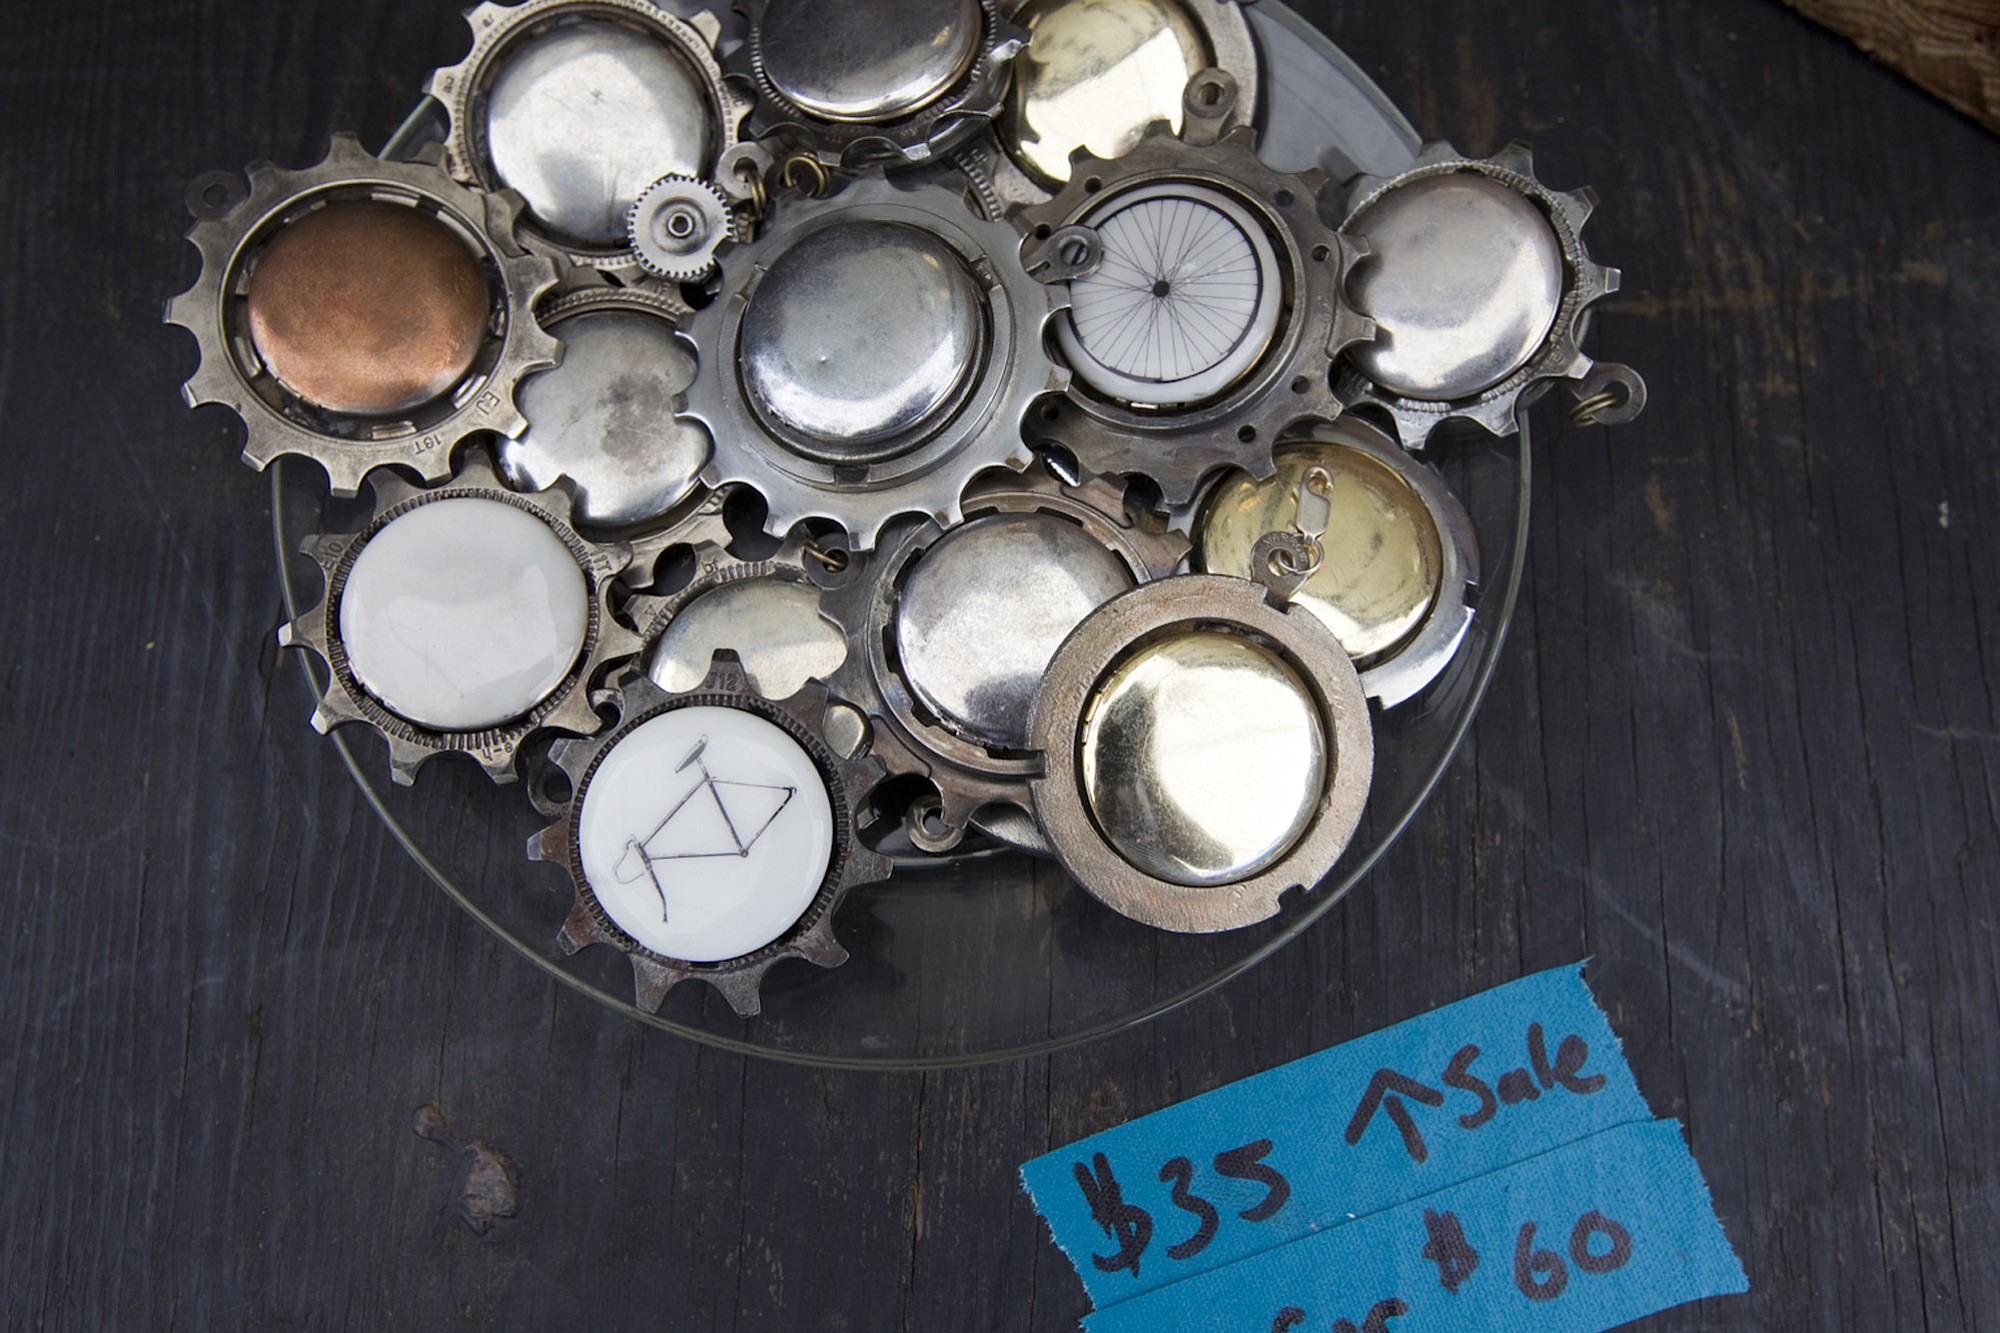 Lockets made from bike parts by artist Johnnie Olivan are for sale Sunday at the Recycled Arts Festival.